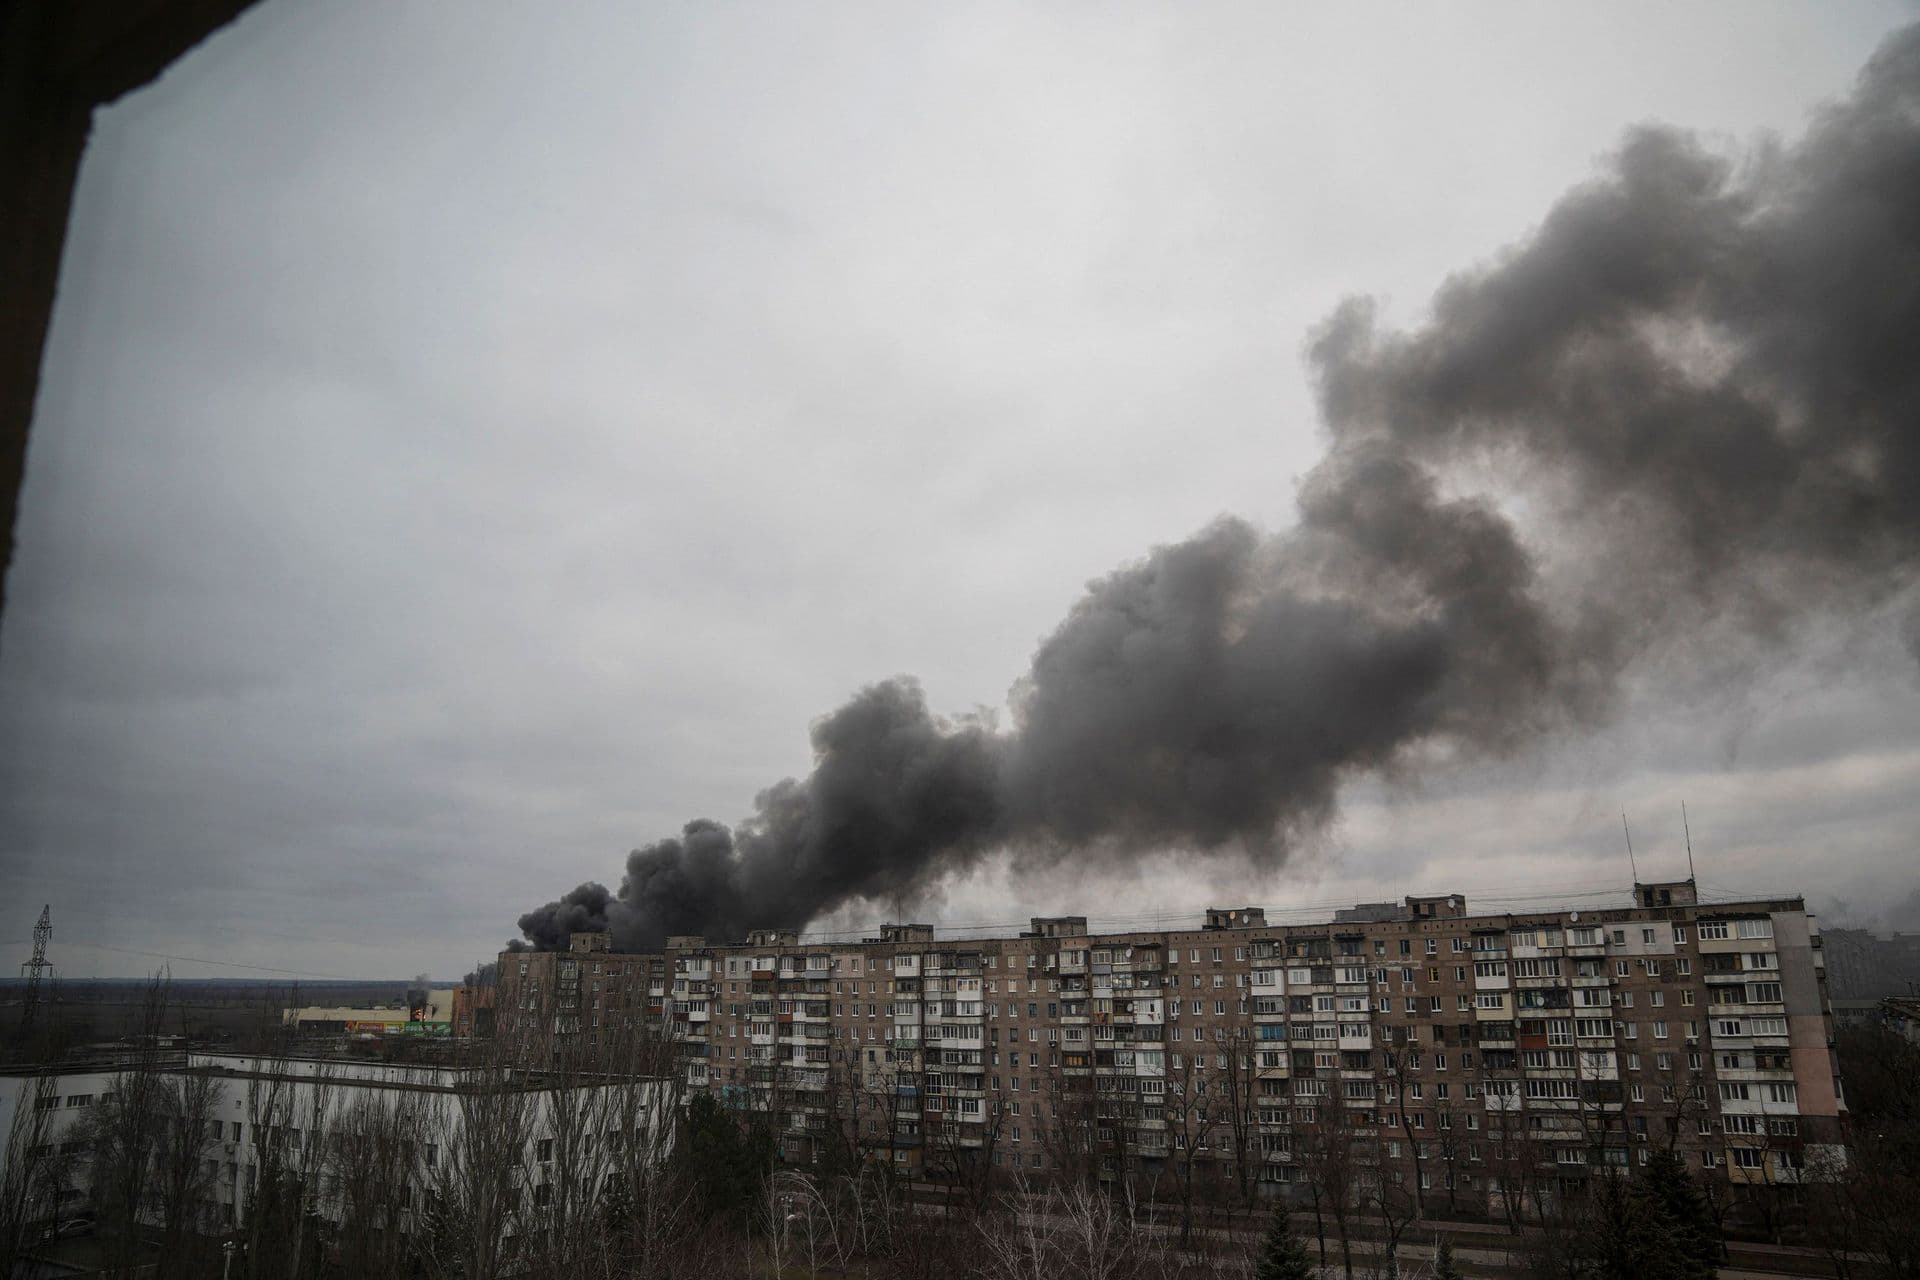 Smoke rises after shelling by Russian forces in Mariupol